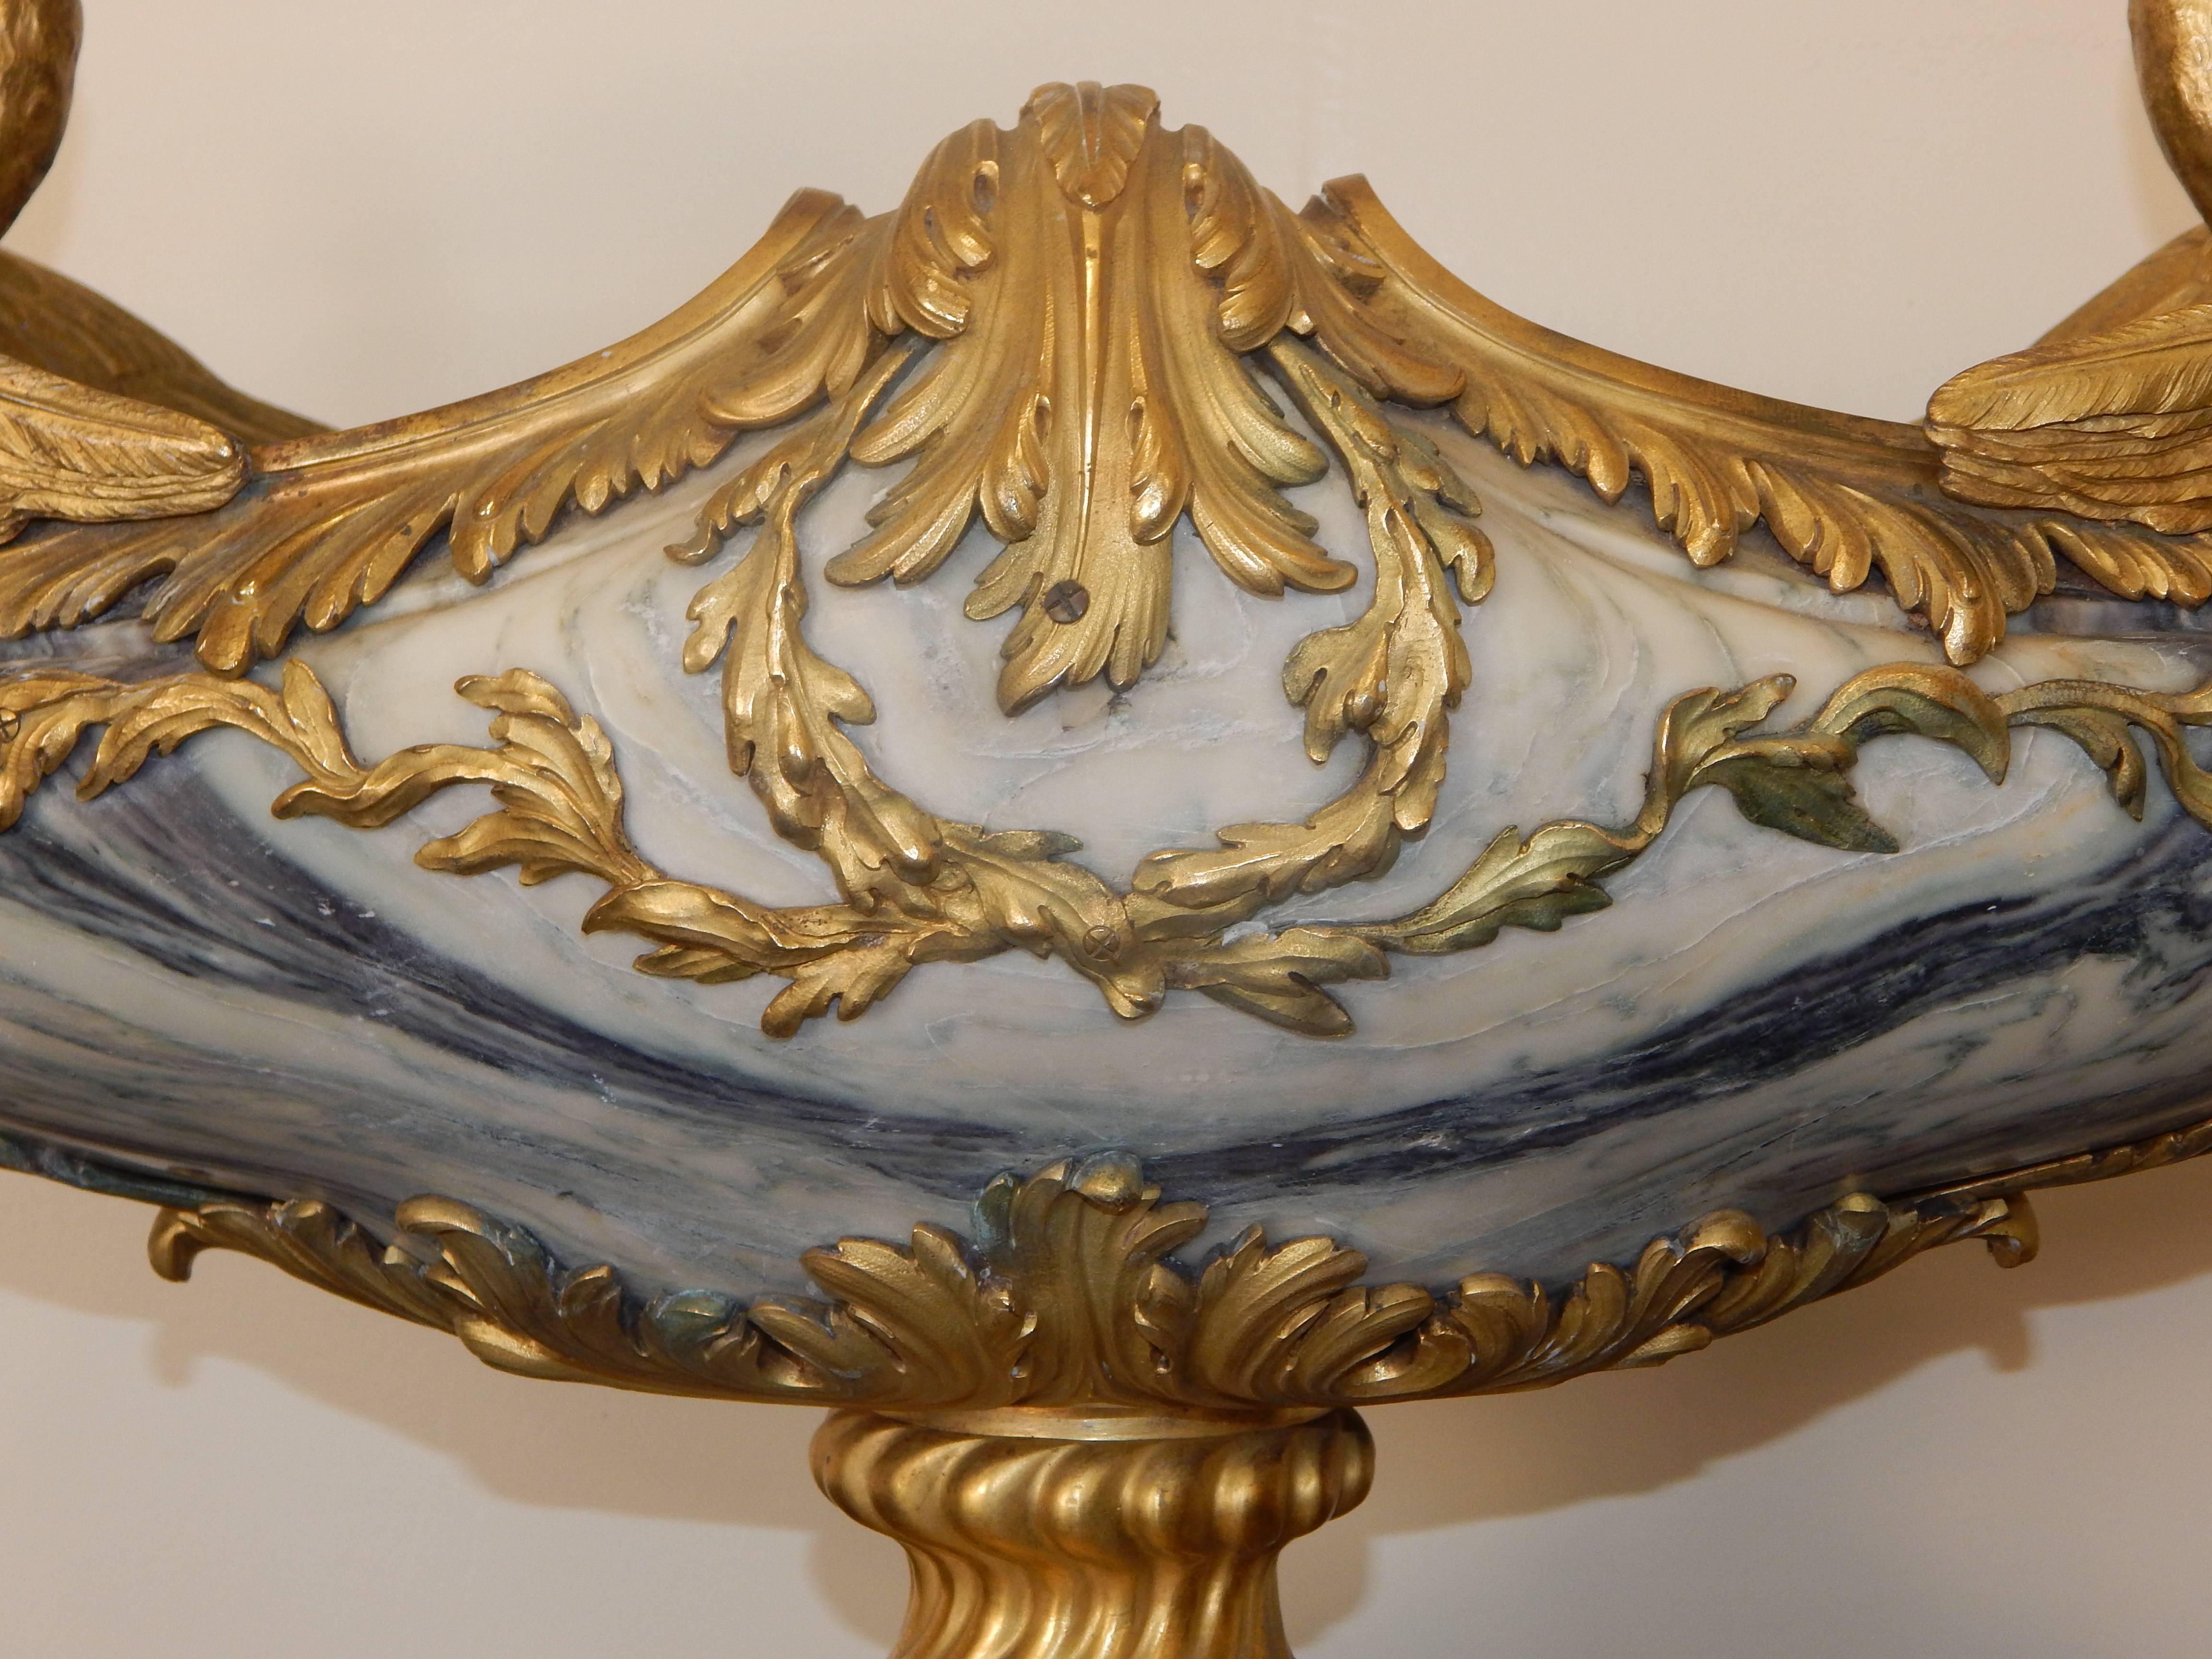 Louis XVI Exquisite Bronze Mounted Marble Centerpiece with Swans For Sale